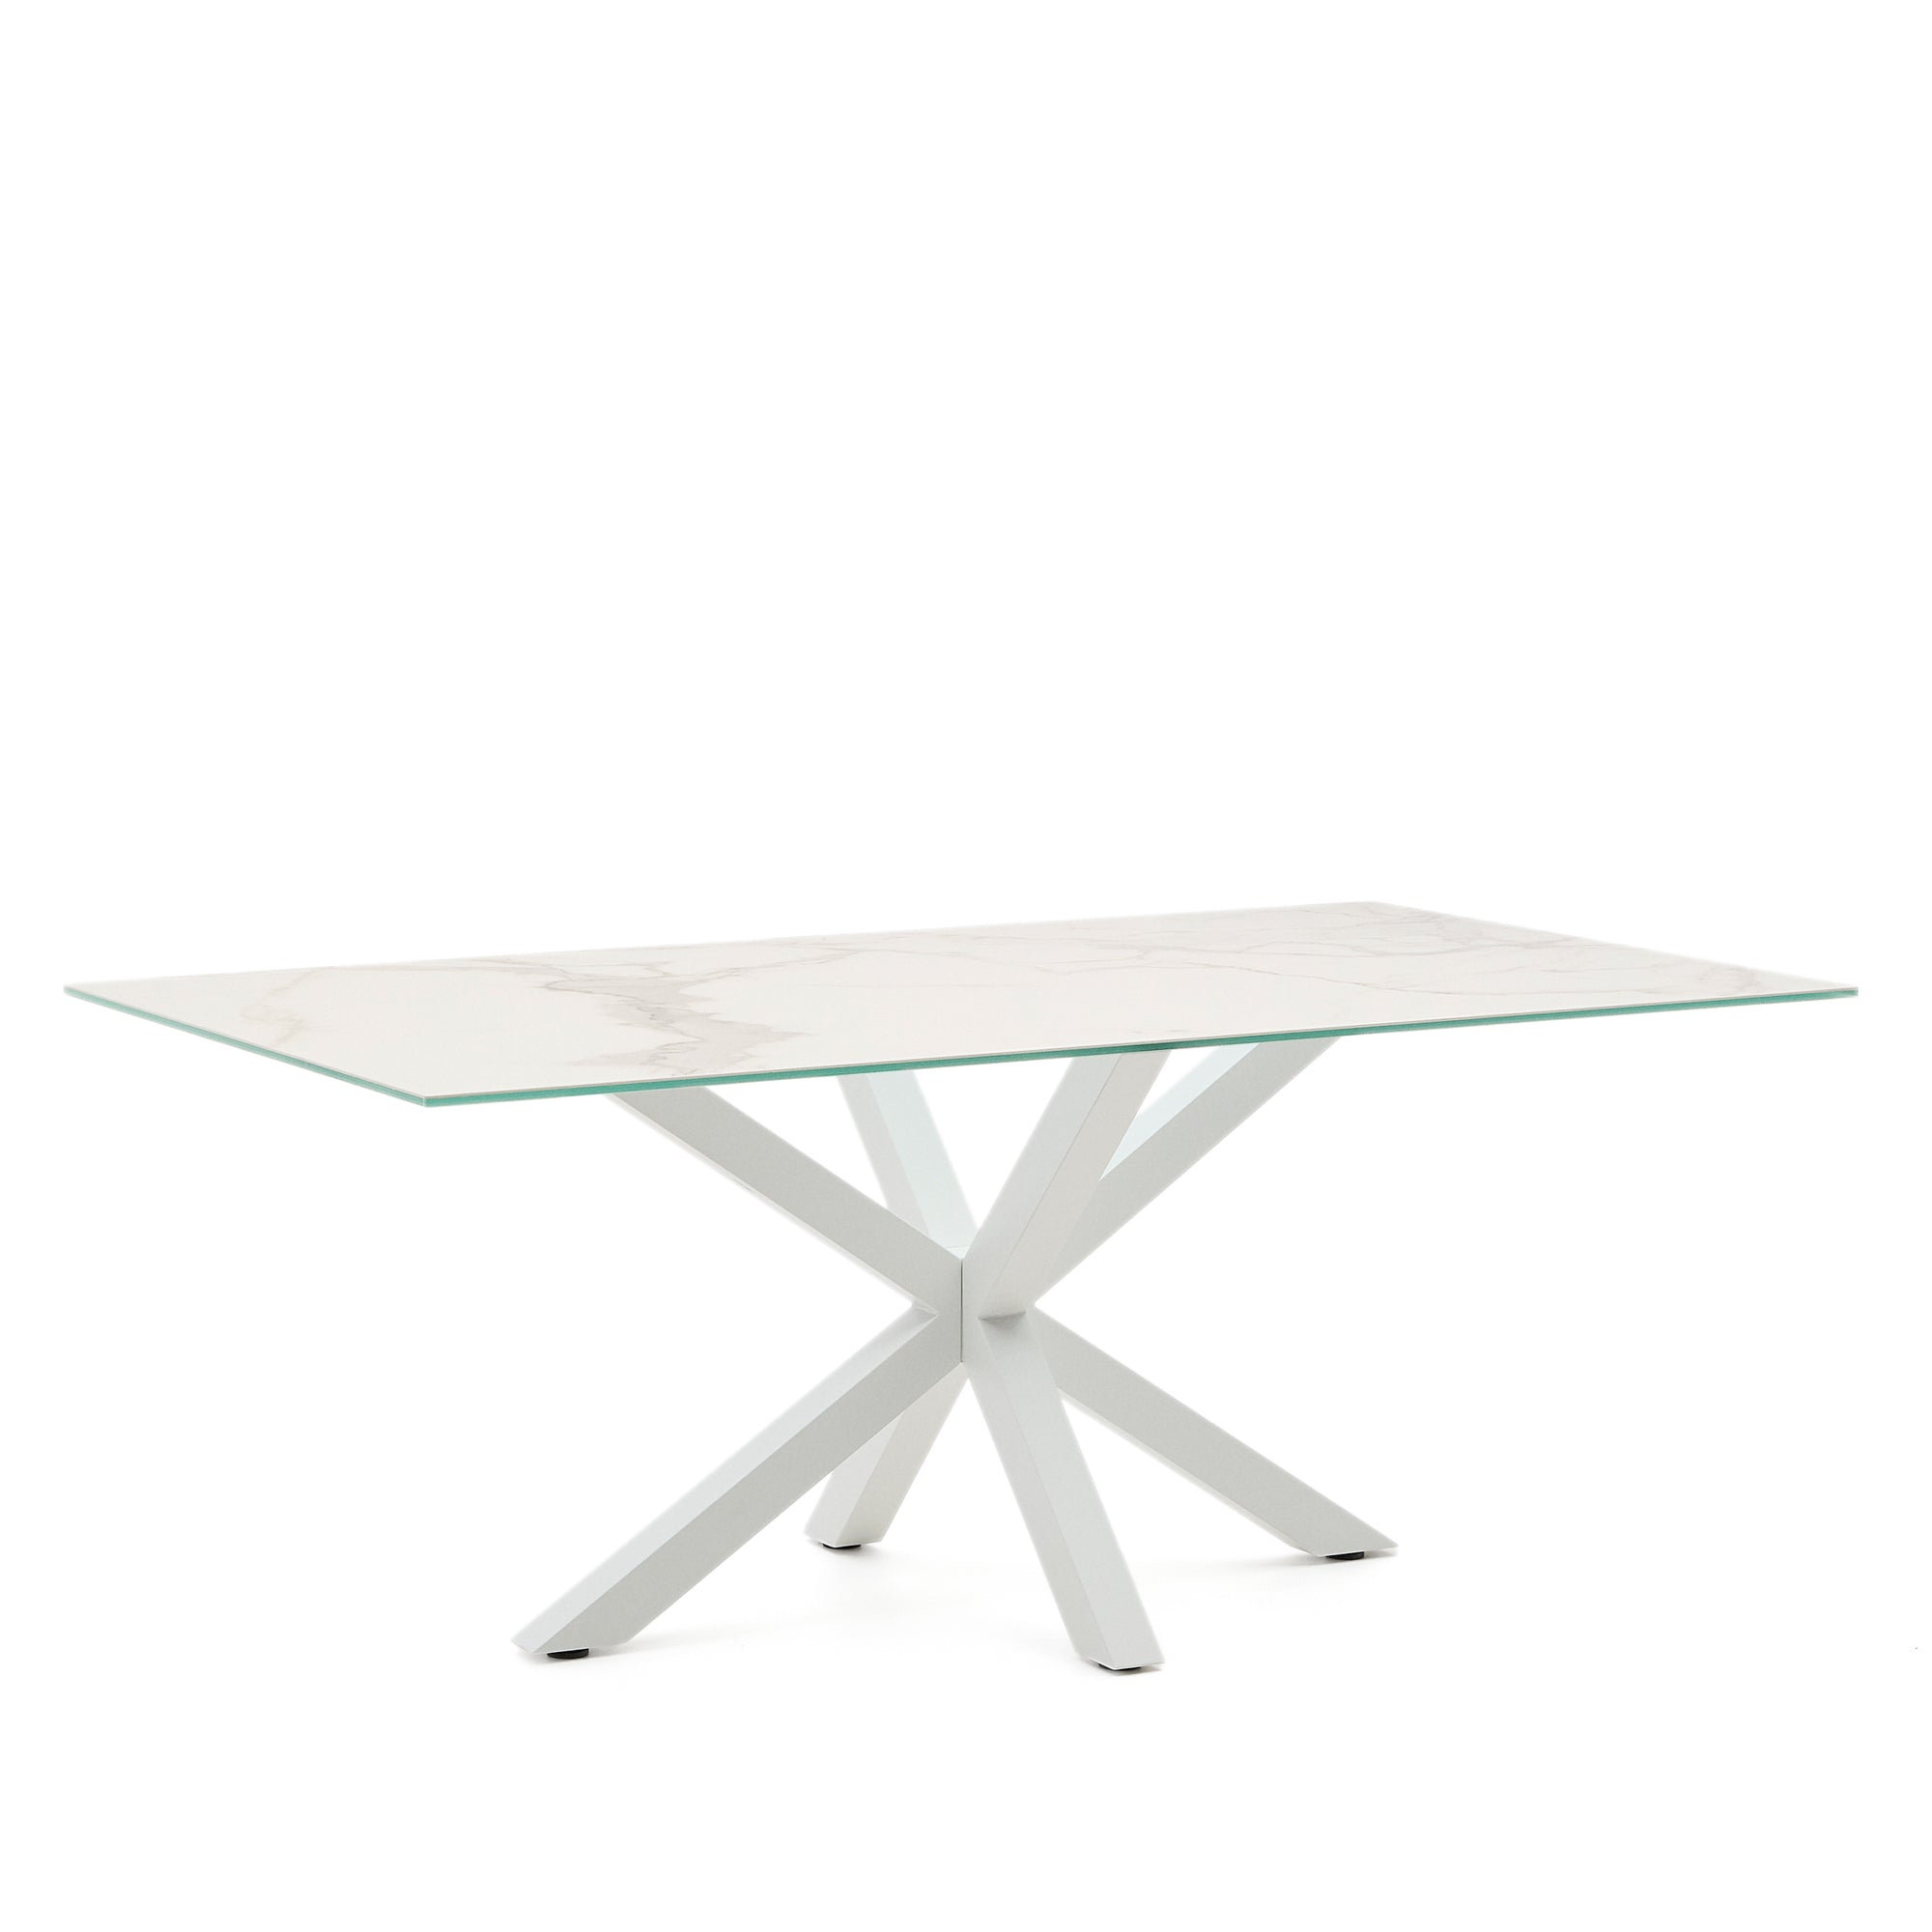 Argo table in white Kalos porcelain and steel legs with white finish, 200 x 100 cm